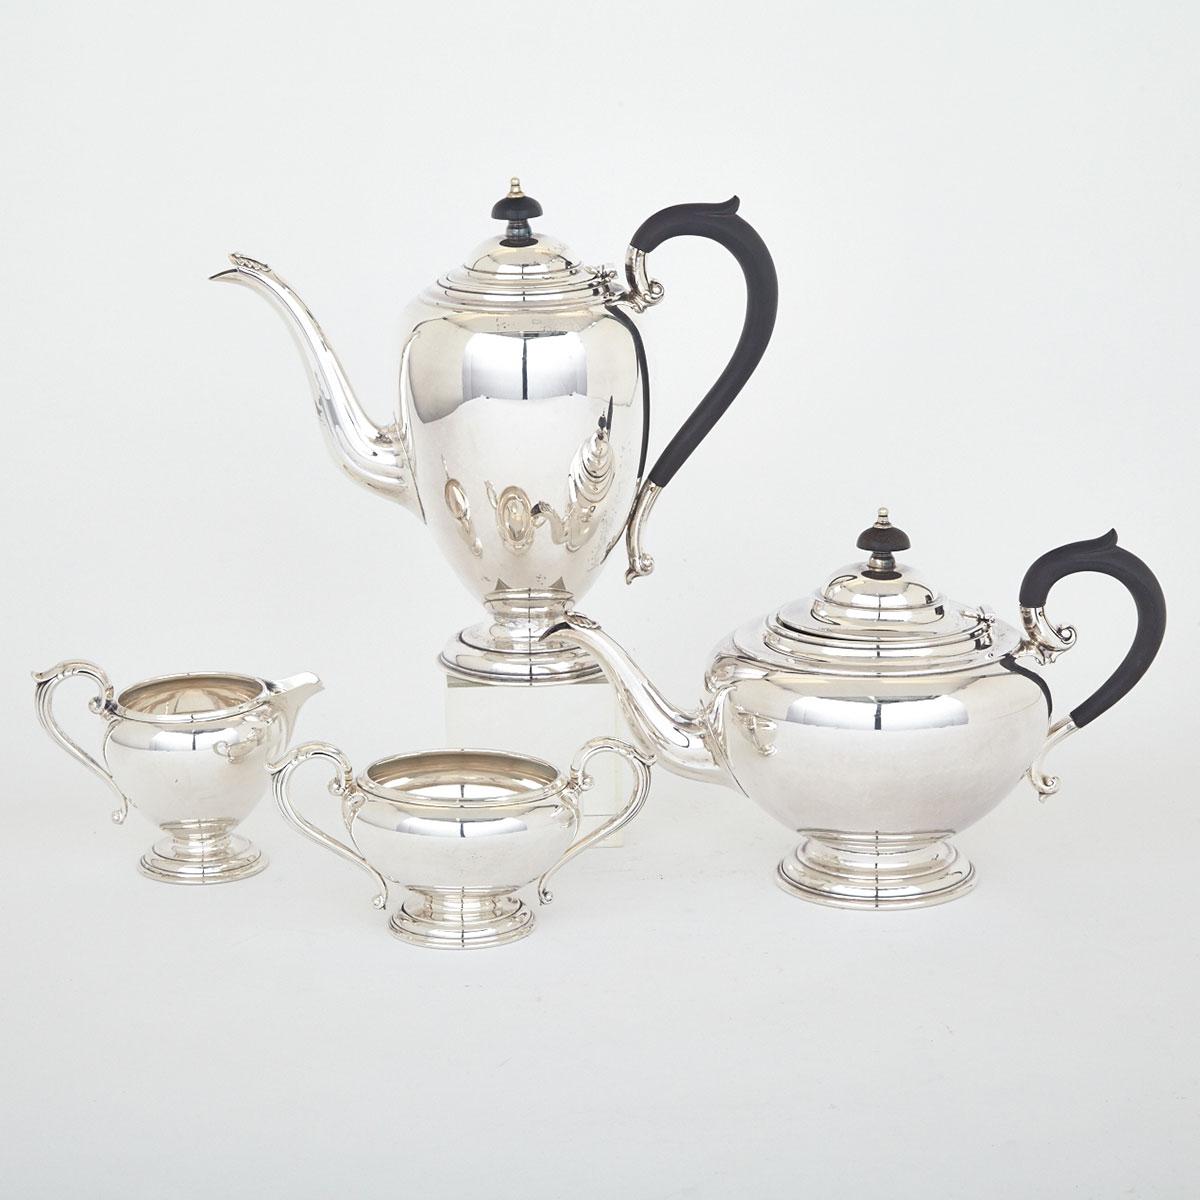 Canadian Silver Tea and Coffee Service, Henry Birks & Sons, Montreal, Que., 1943